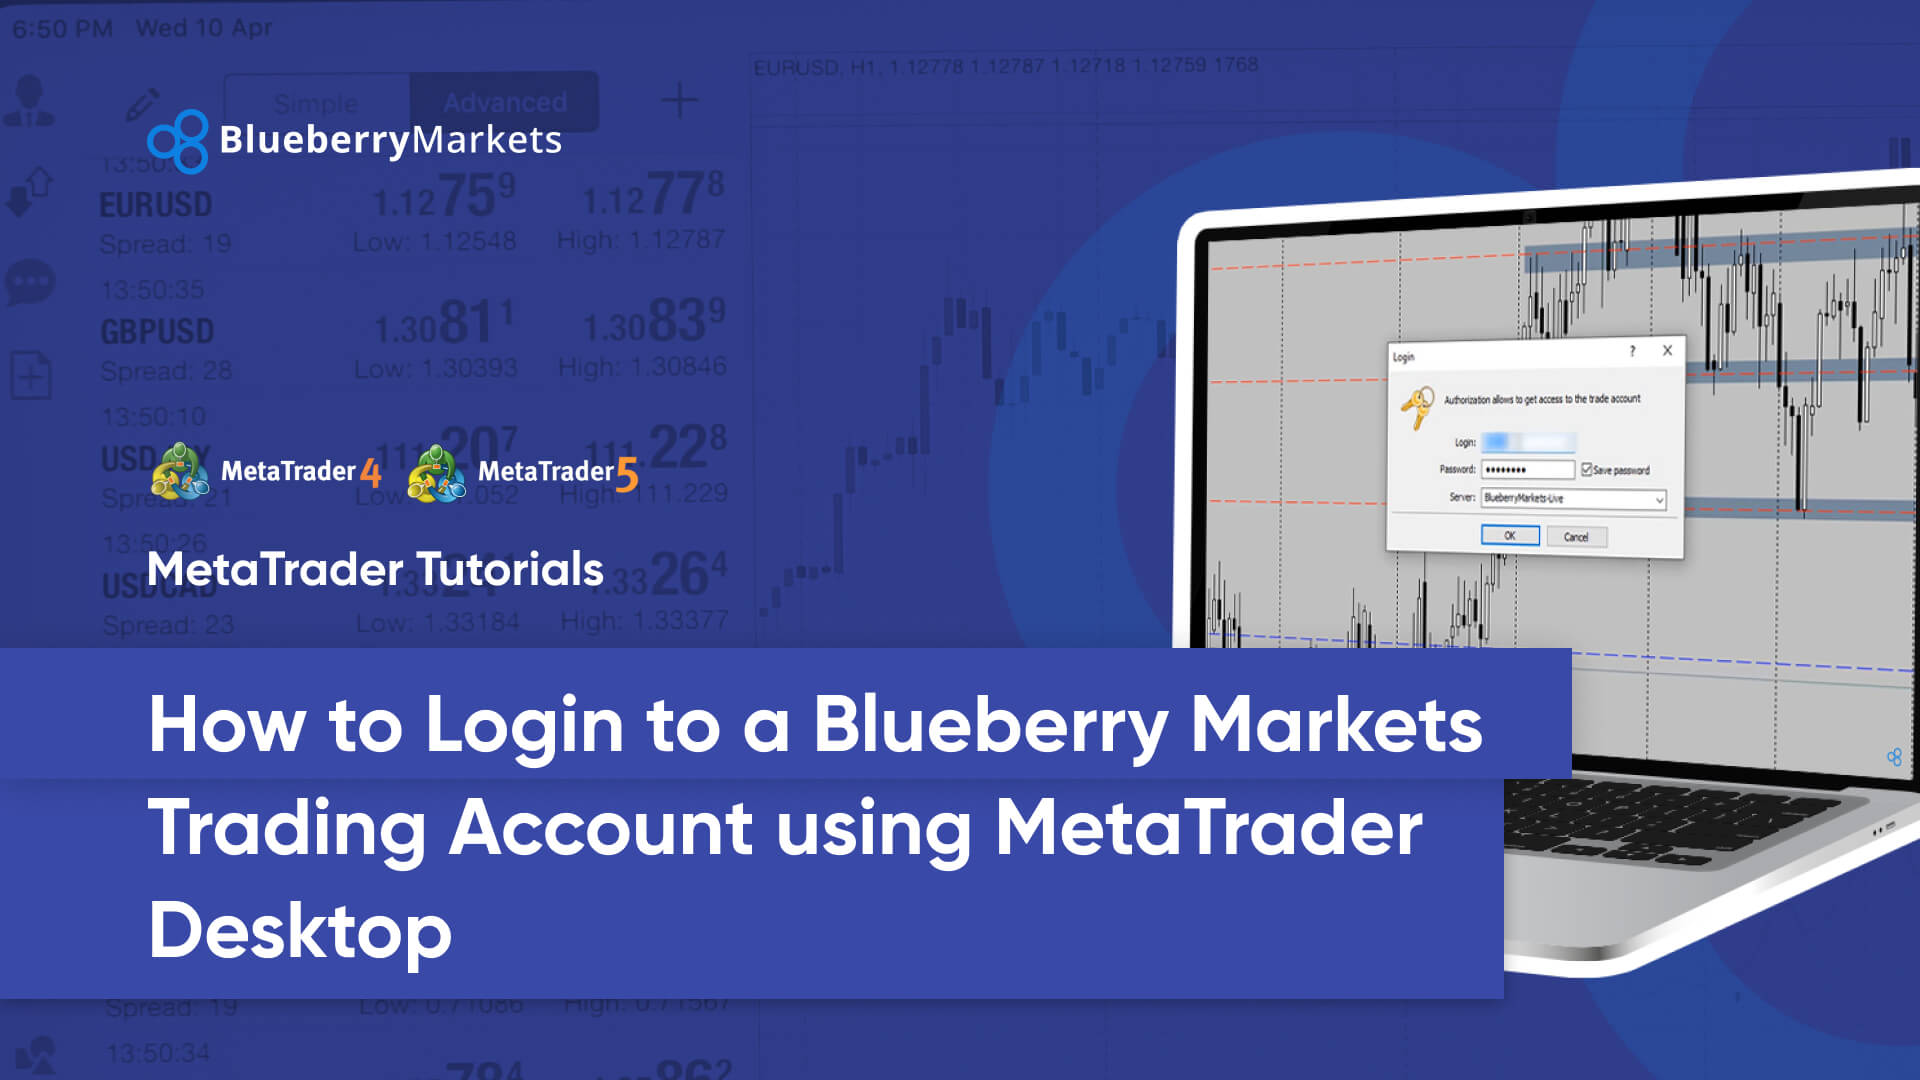 How To Login to a Blueberry Markets Trading Account Using MetaTrader Desktop